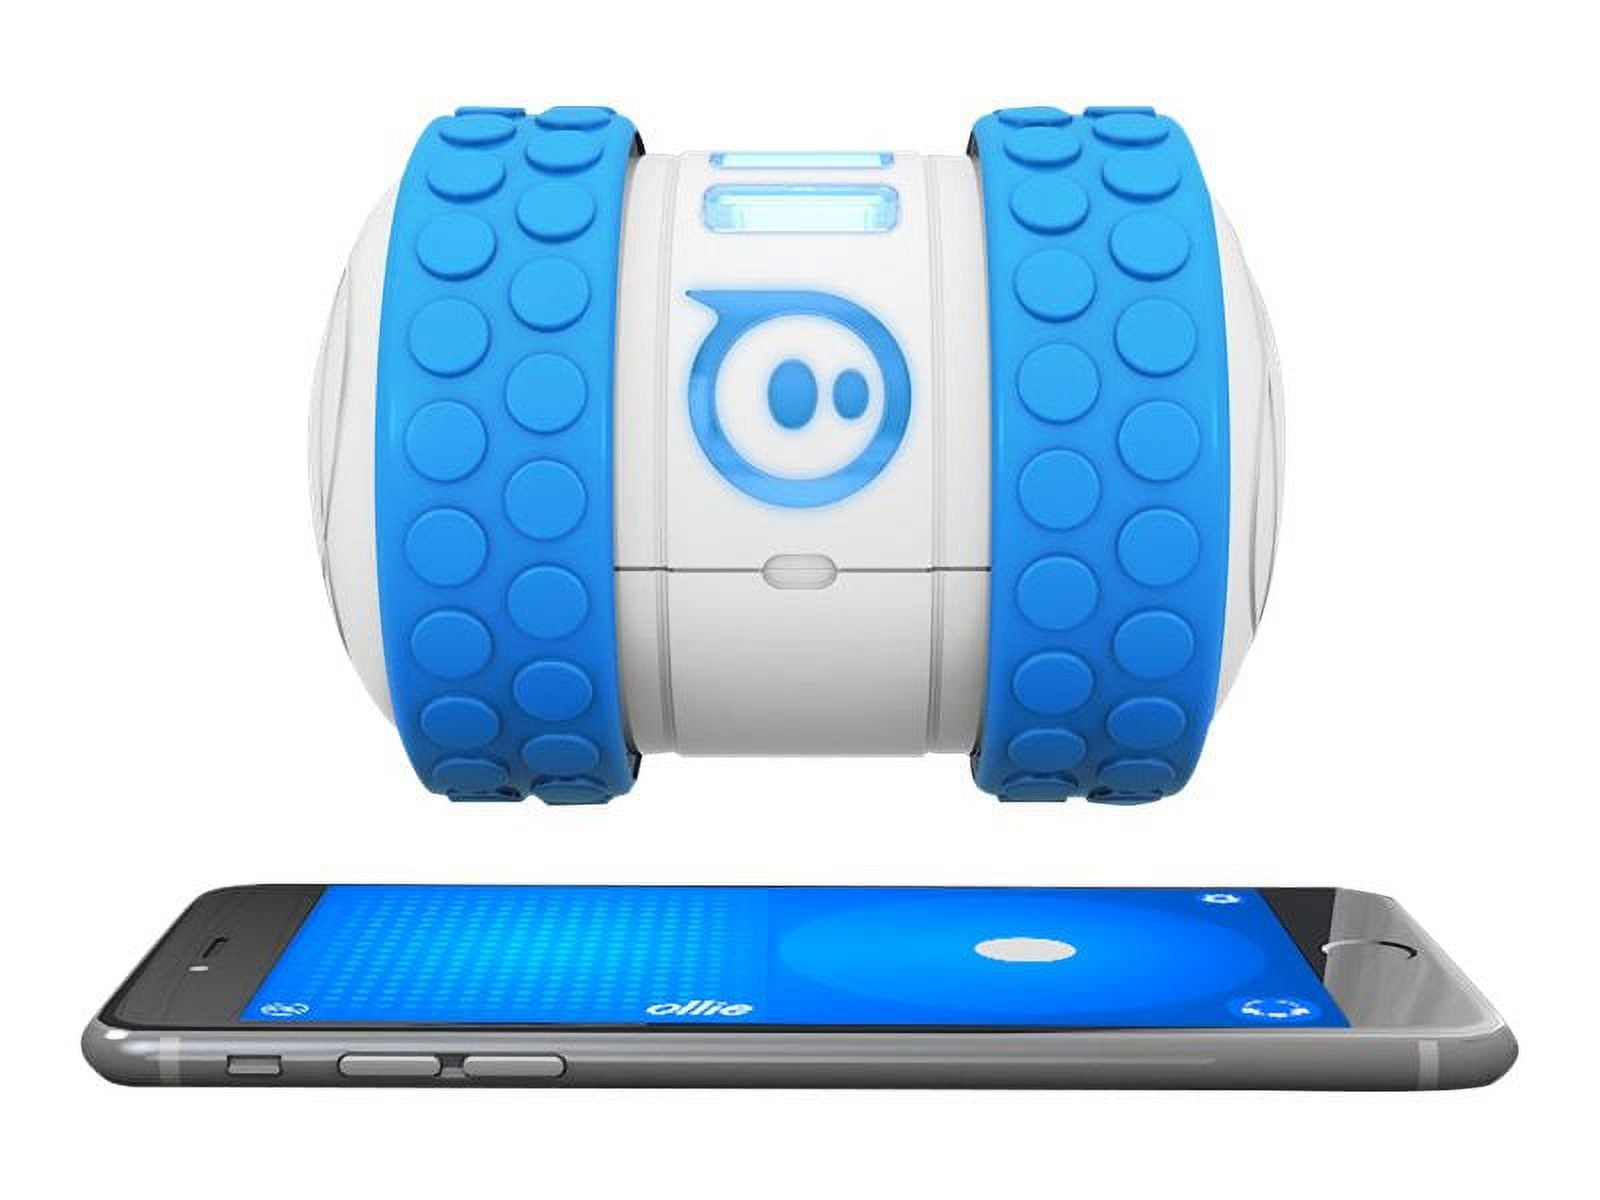 Sphero Ollie programmable app-enabled device with electric motor